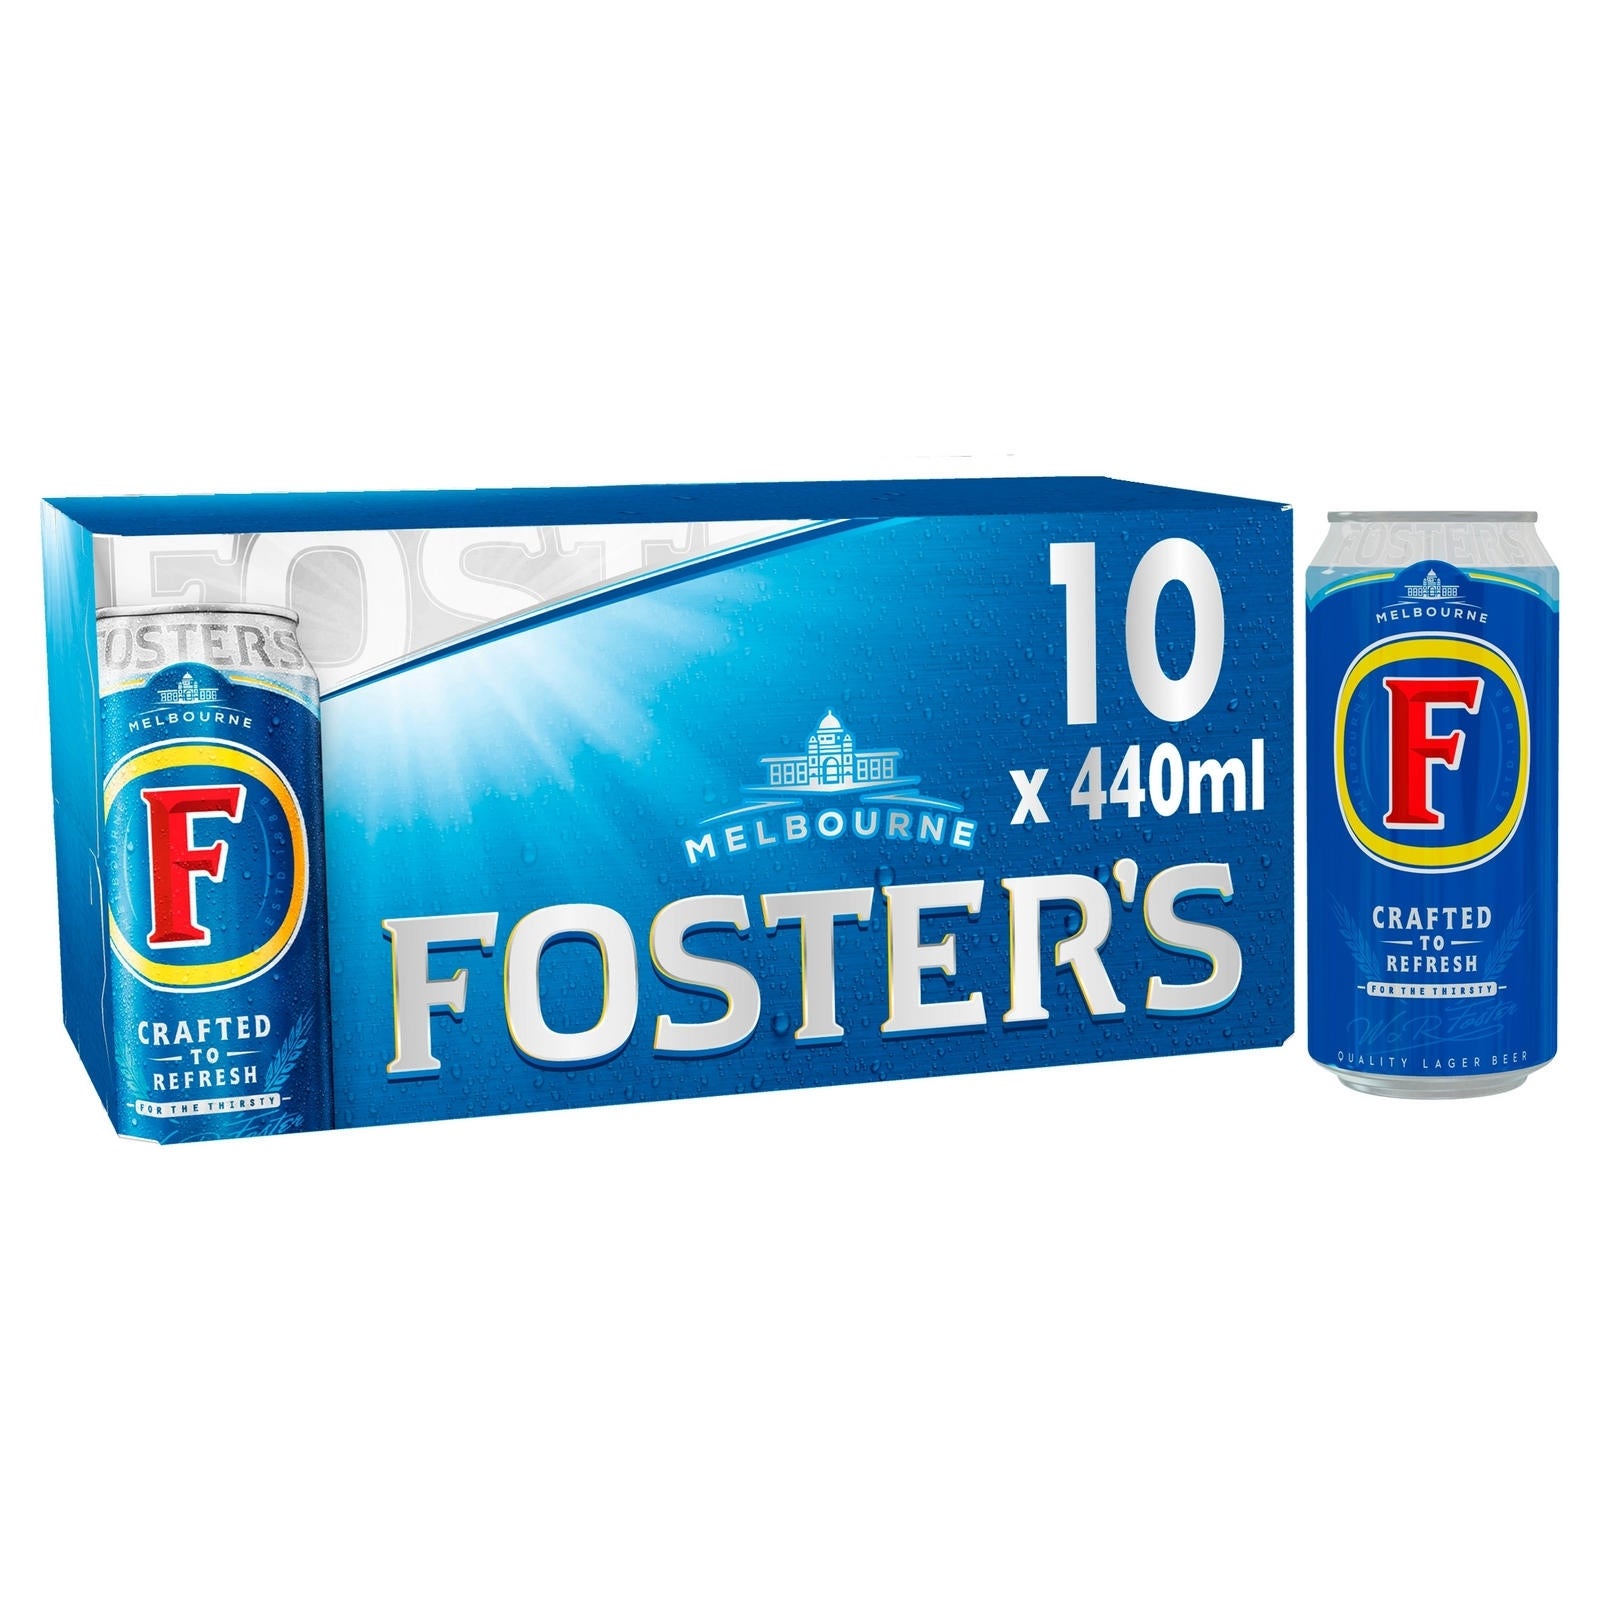 FOSTERS 440ML 10 PACK X 1